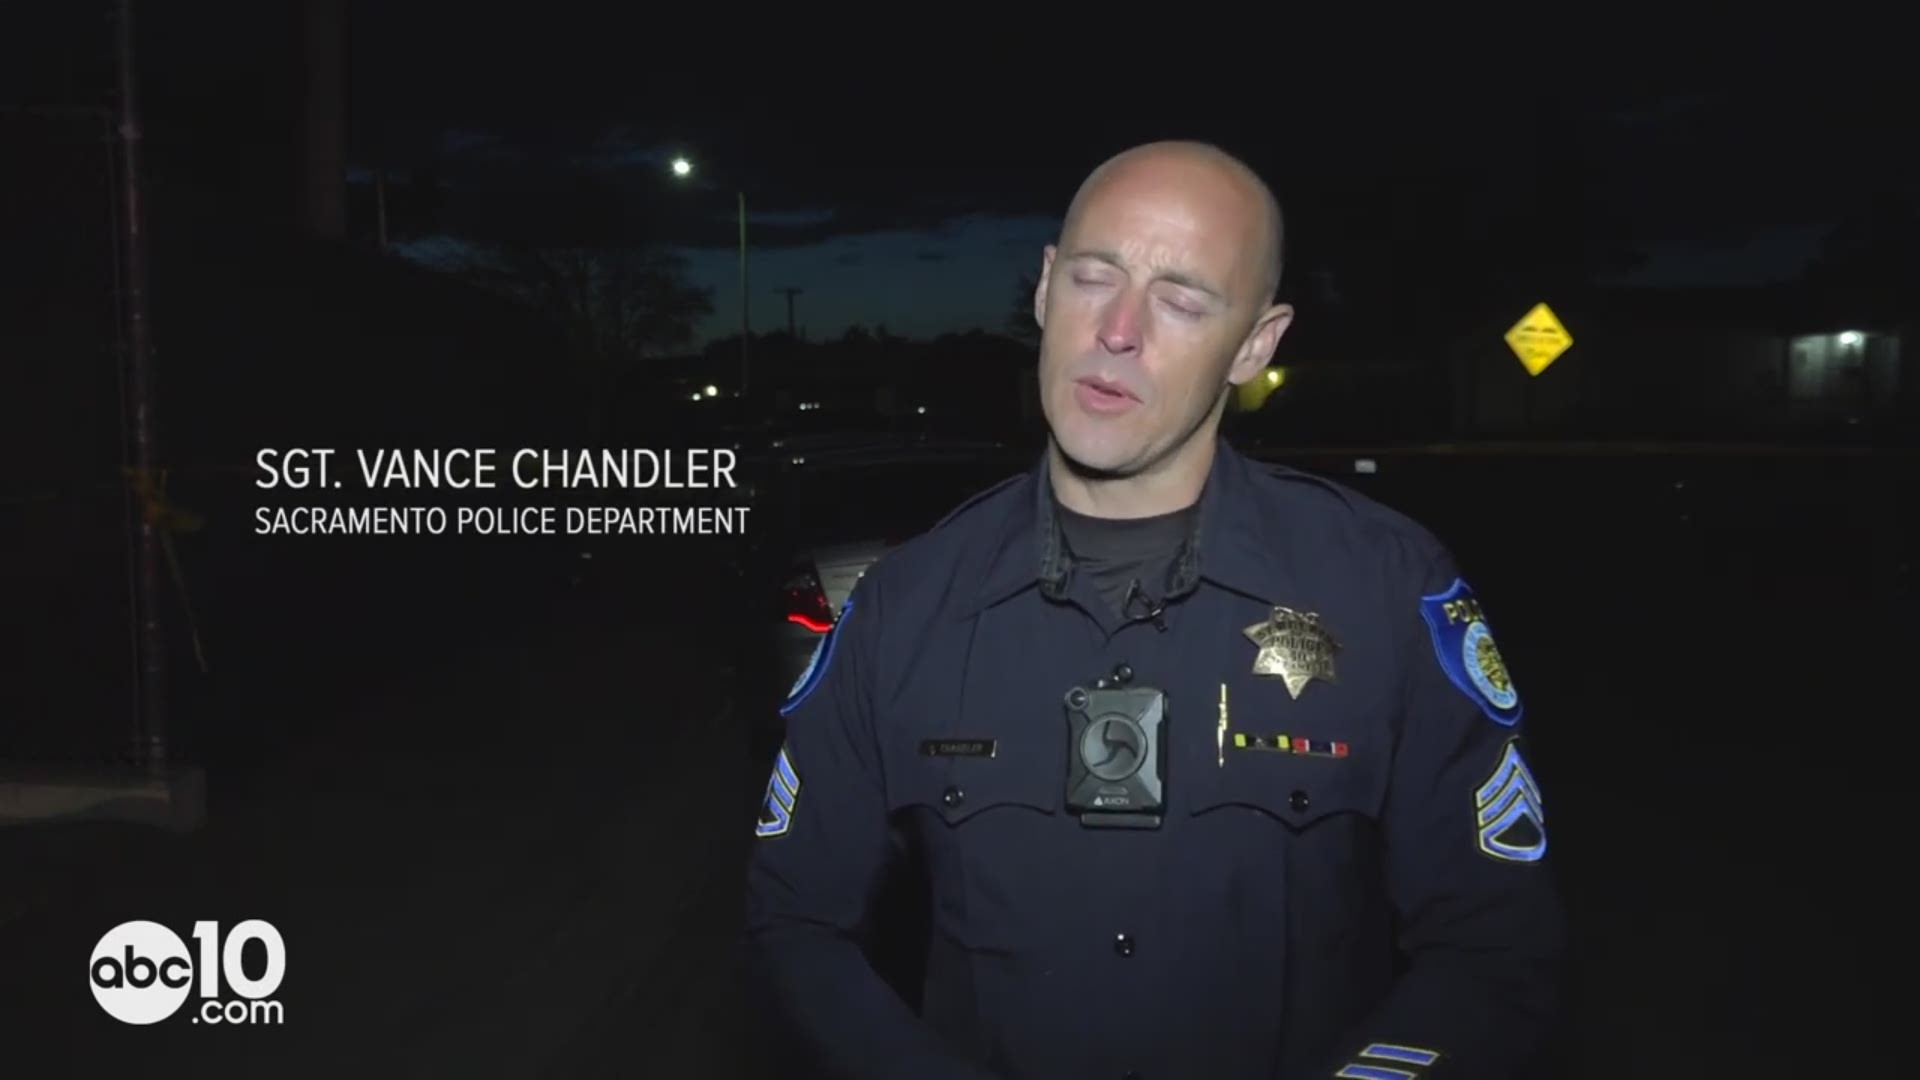 Sacramento police Sgt. Vance Chandler describes a shooting near Strawberry Manor Park that left one man dead on Saturday, April 20.